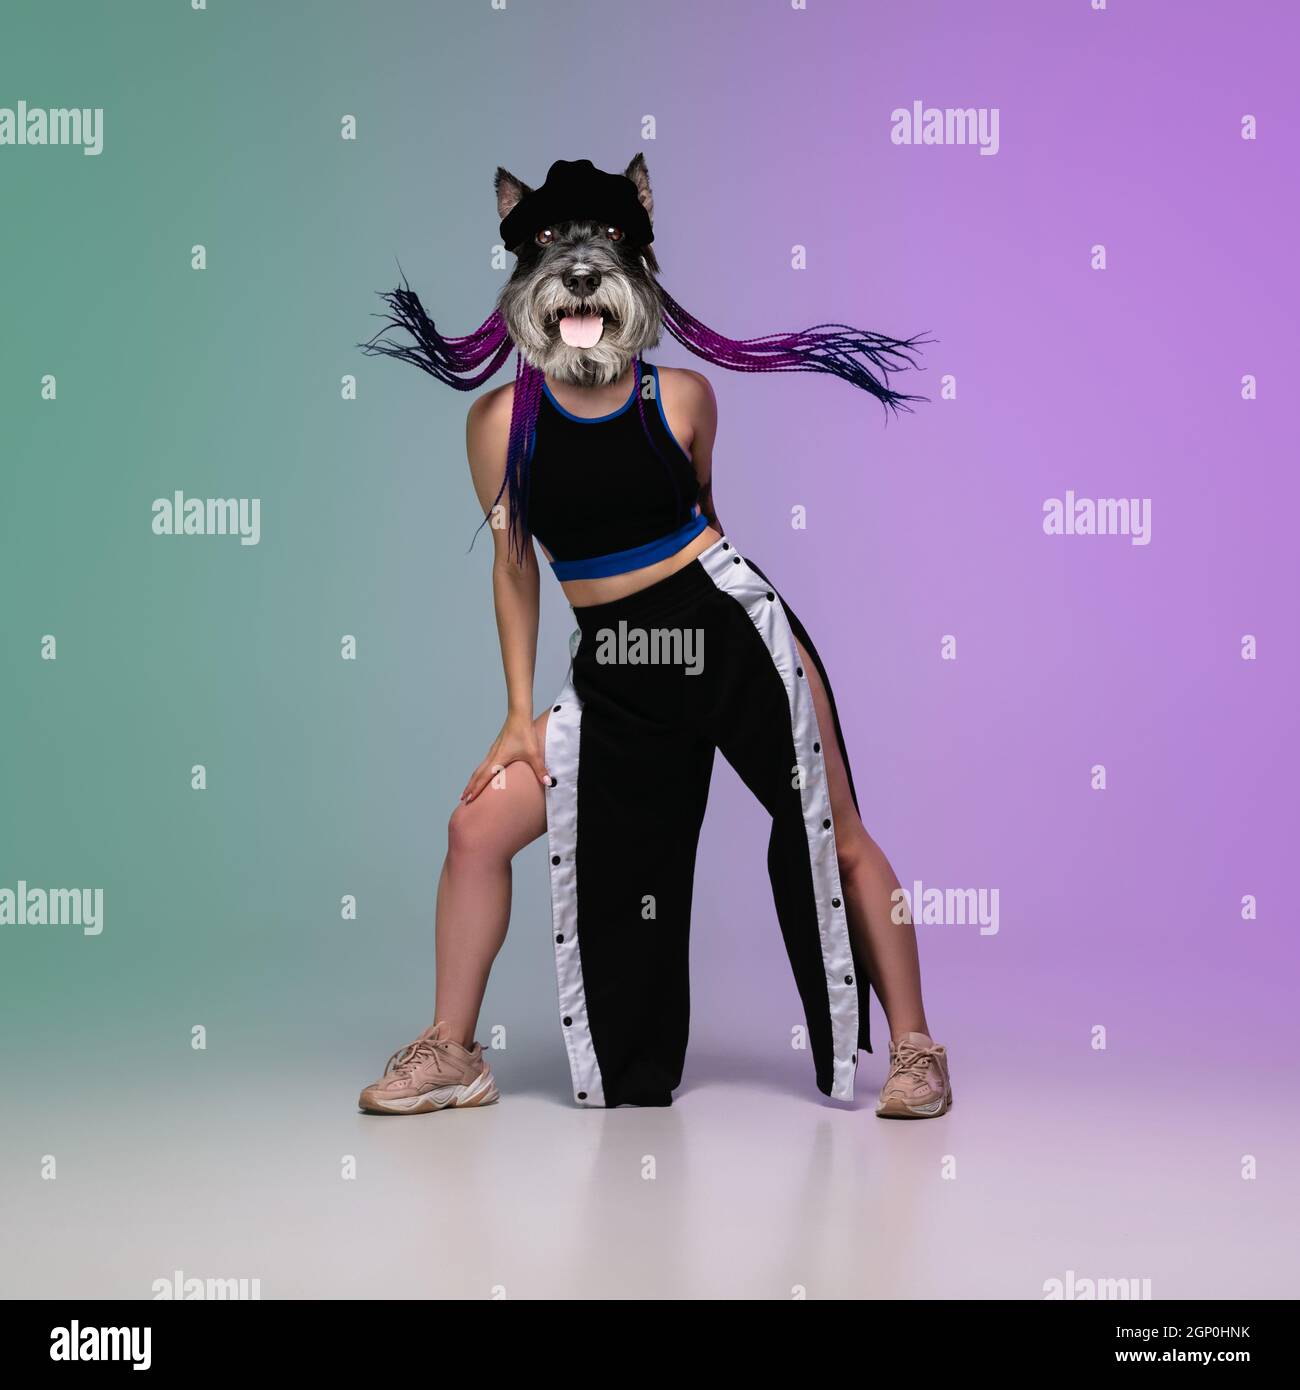 https://c8.alamy.com/comp/2GP0HNK/art-collage-young-woman-hip-hop-dancer-headed-of-dogs-head-dancing-isolated-over-gradient-background-inspiration-idea-street-dance-style-2GP0HNK.jpg